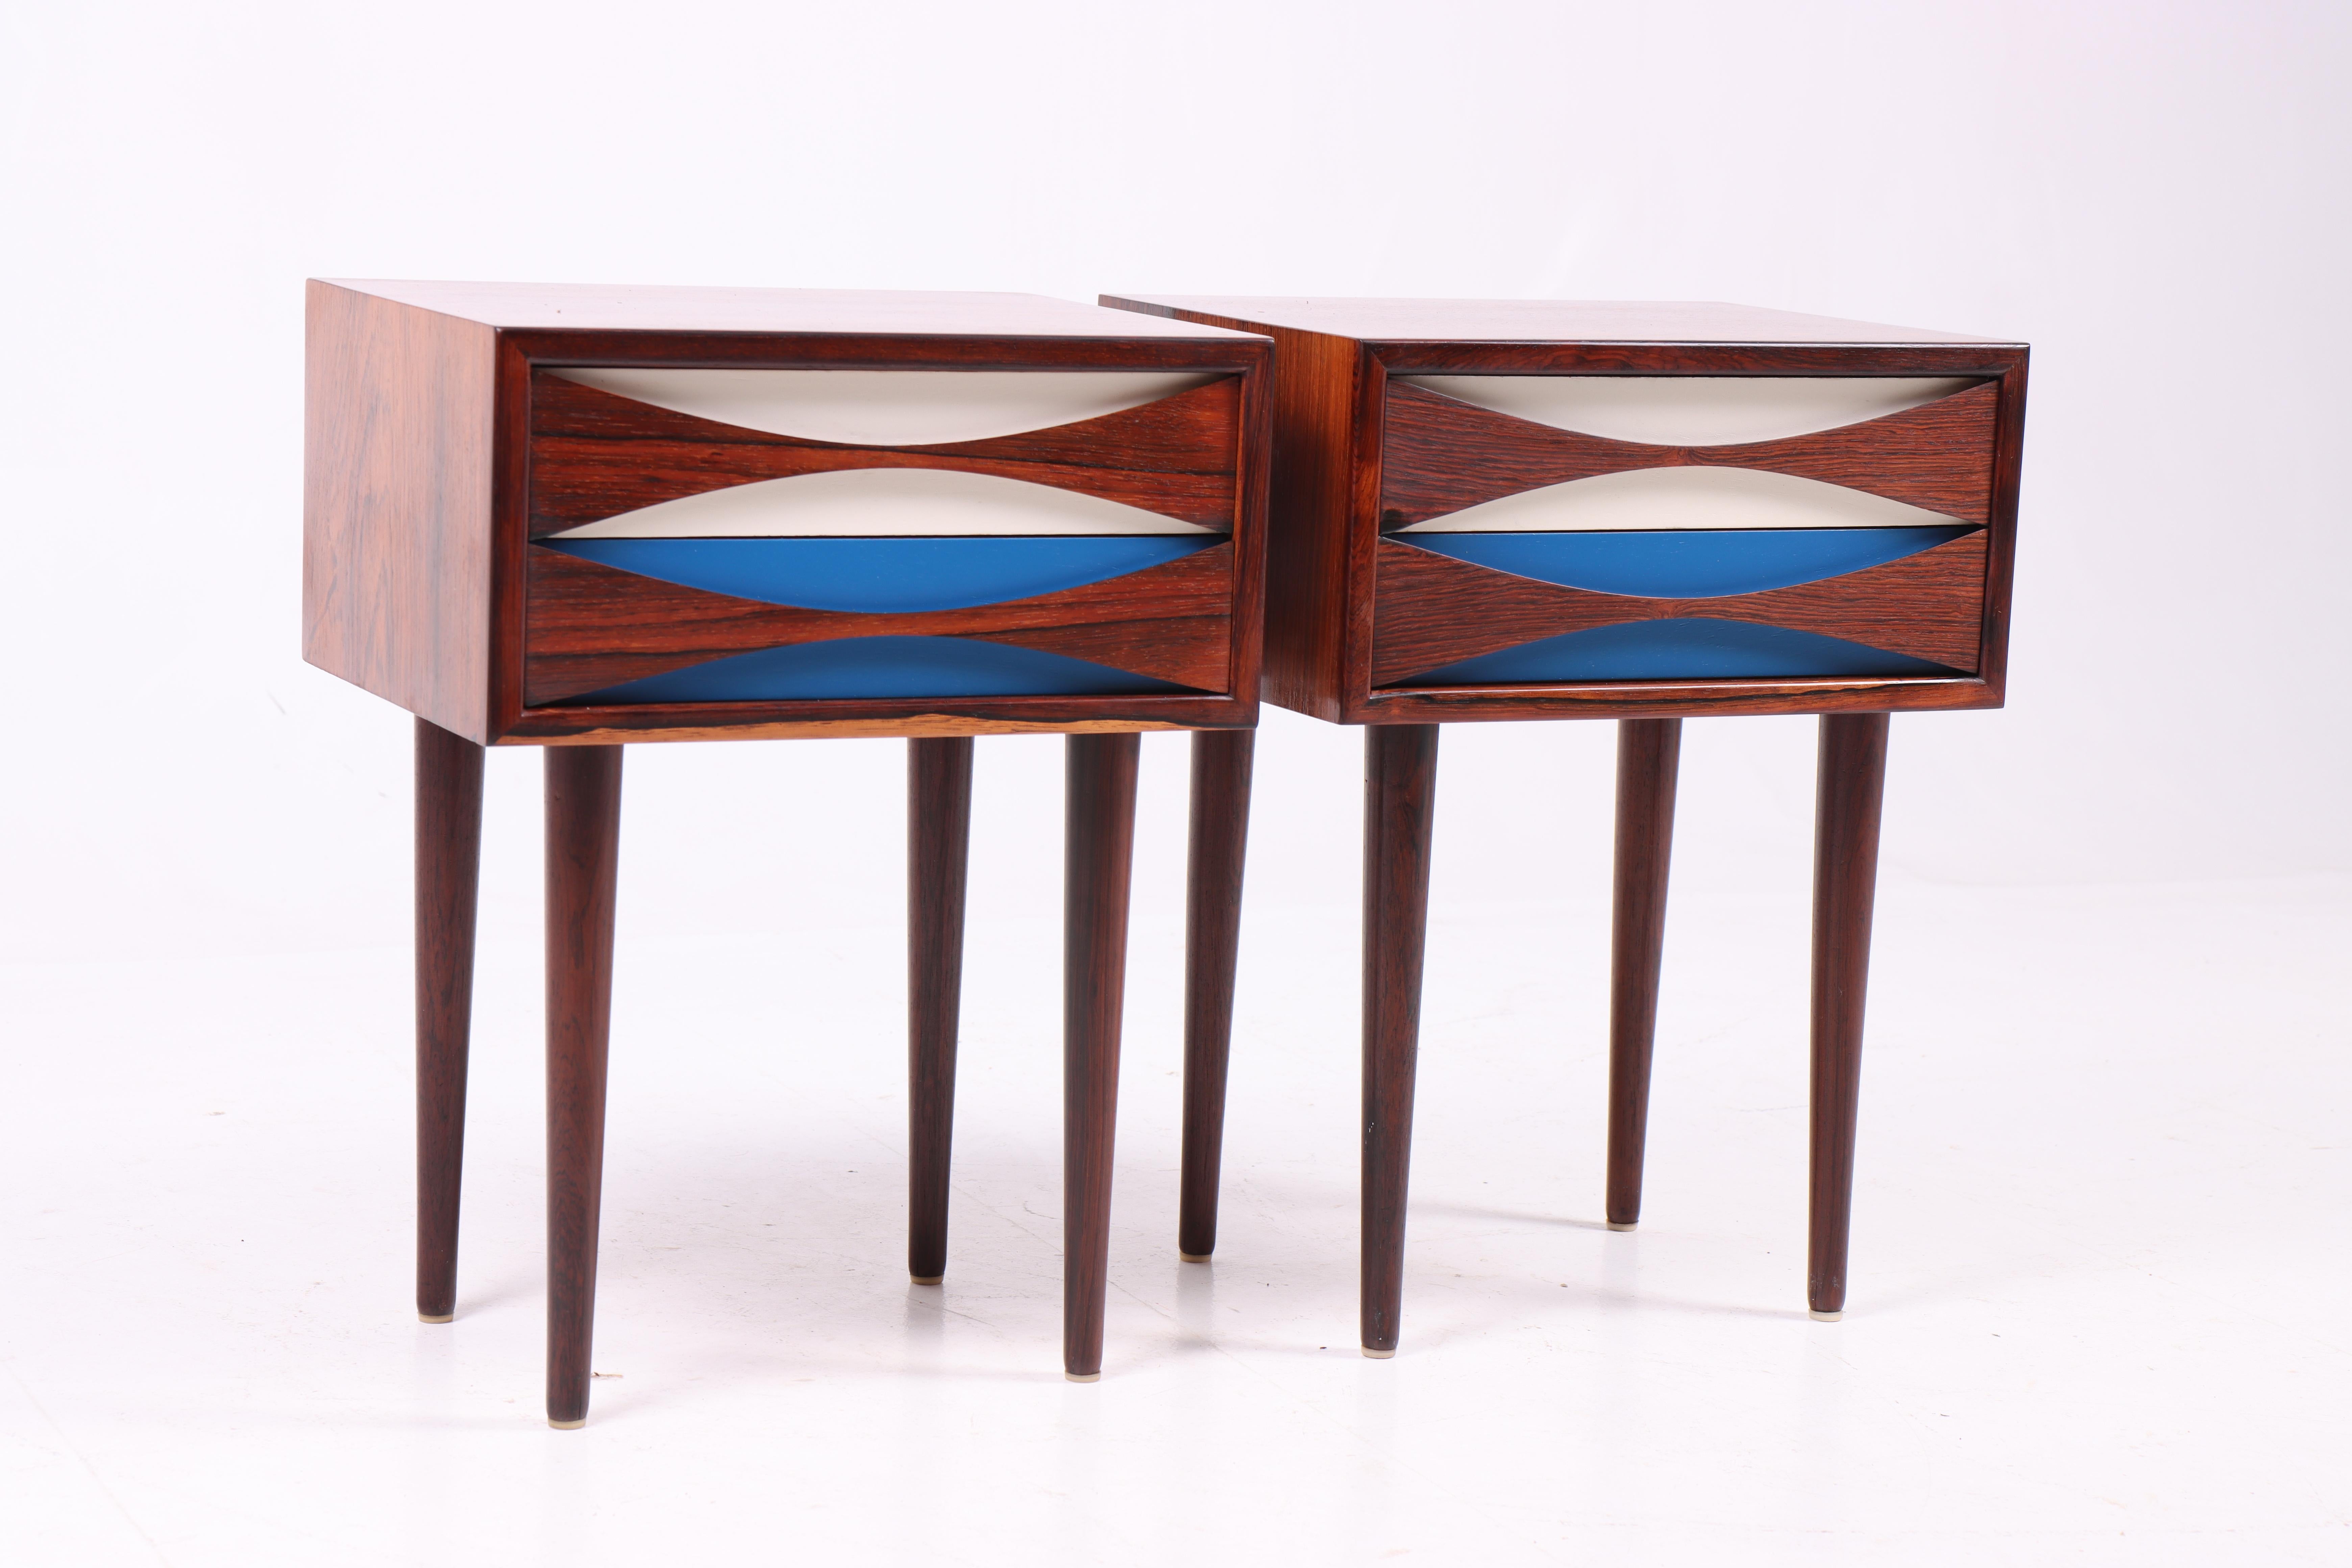 Mid-20th Century Pair of Rare Midcentury Nightstands in Rosewood by Niels Clausen, 1960s For Sale